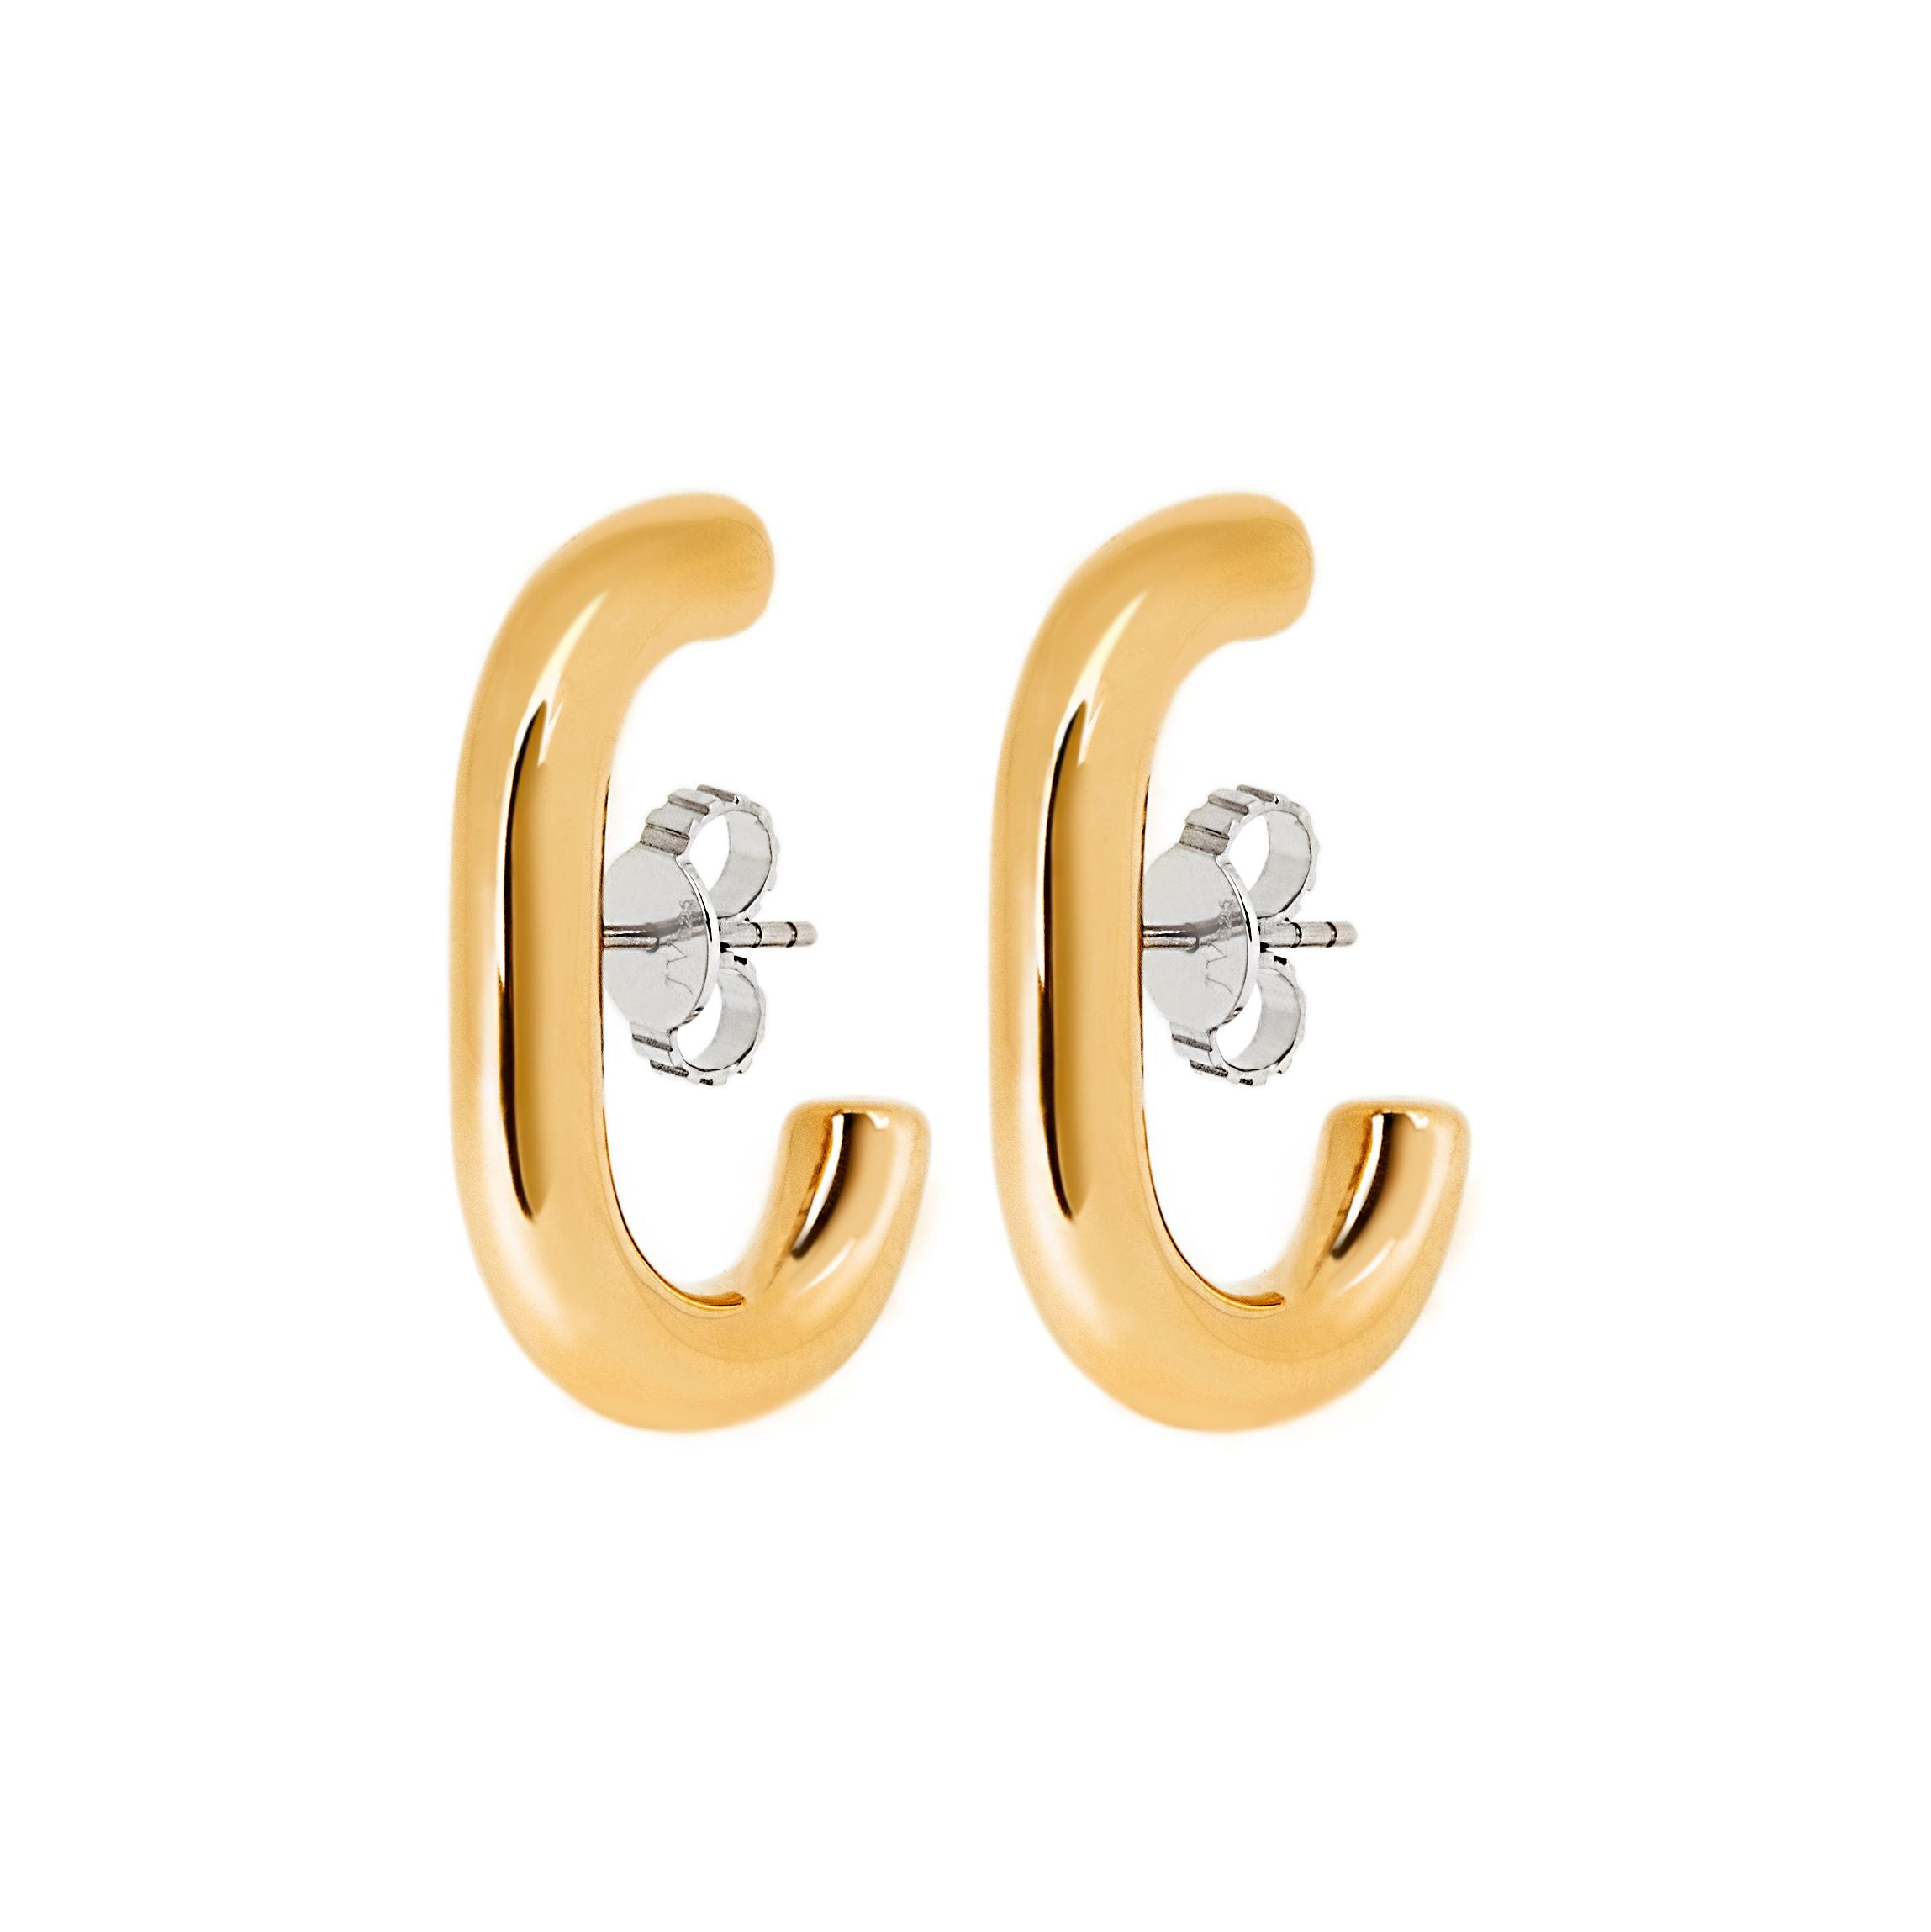 EAR HOOK 18K YELLOW GOLD PLATED SILVER